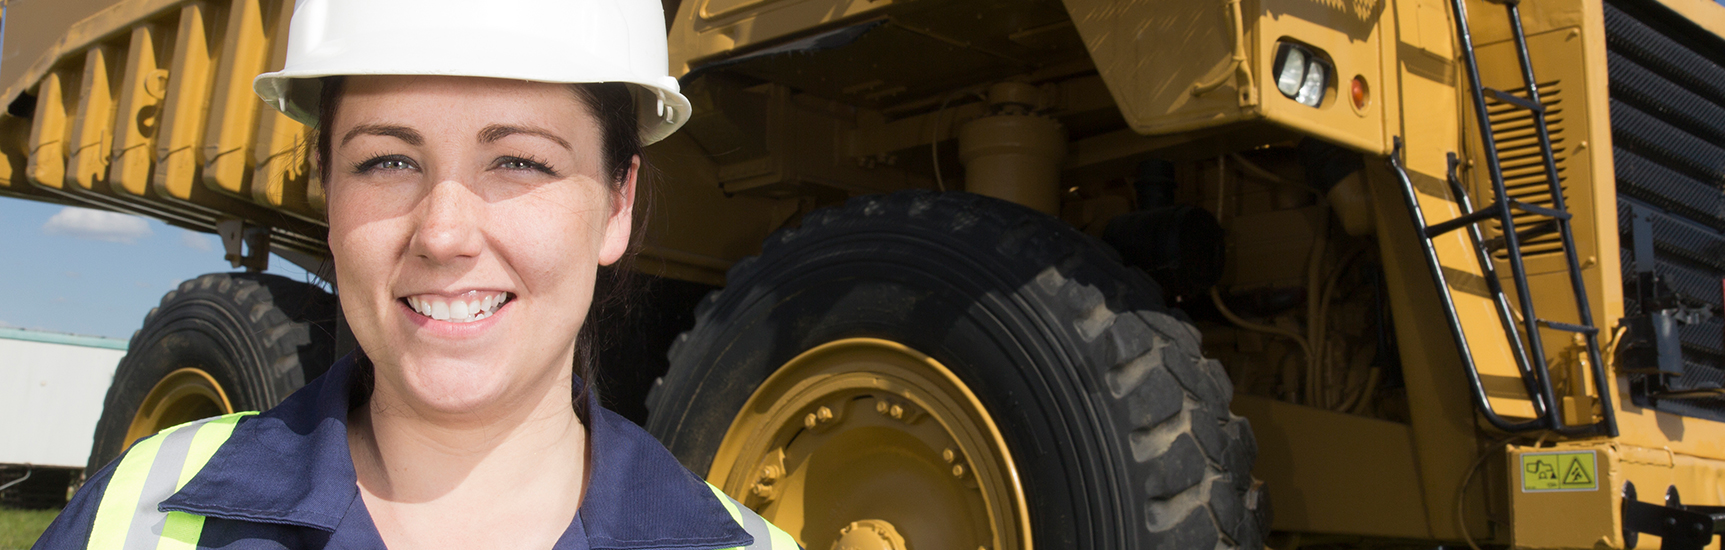 Happy mining apprentice standing in front of machinery